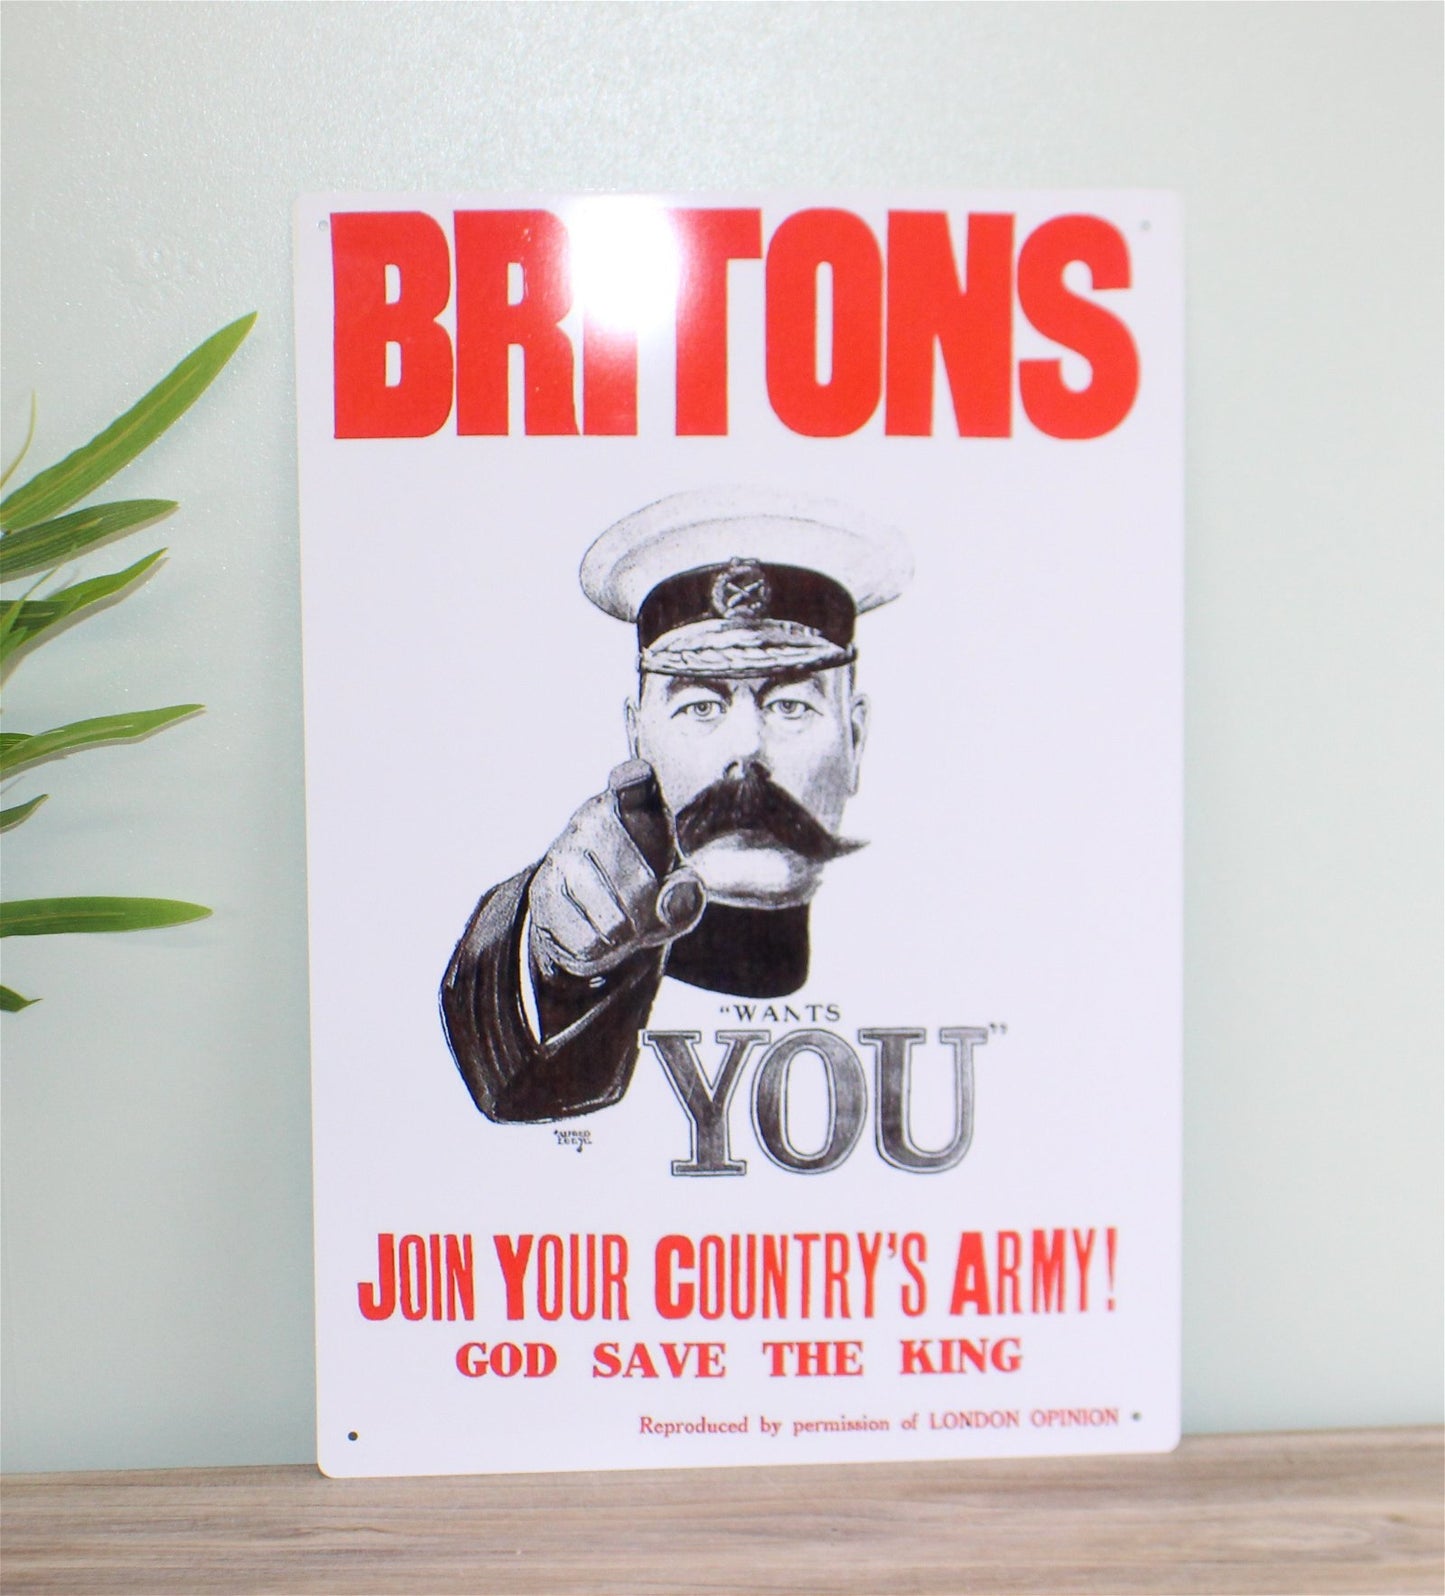 Vintage Metal Sign - Retro Propaganda - Join Your Country's Army